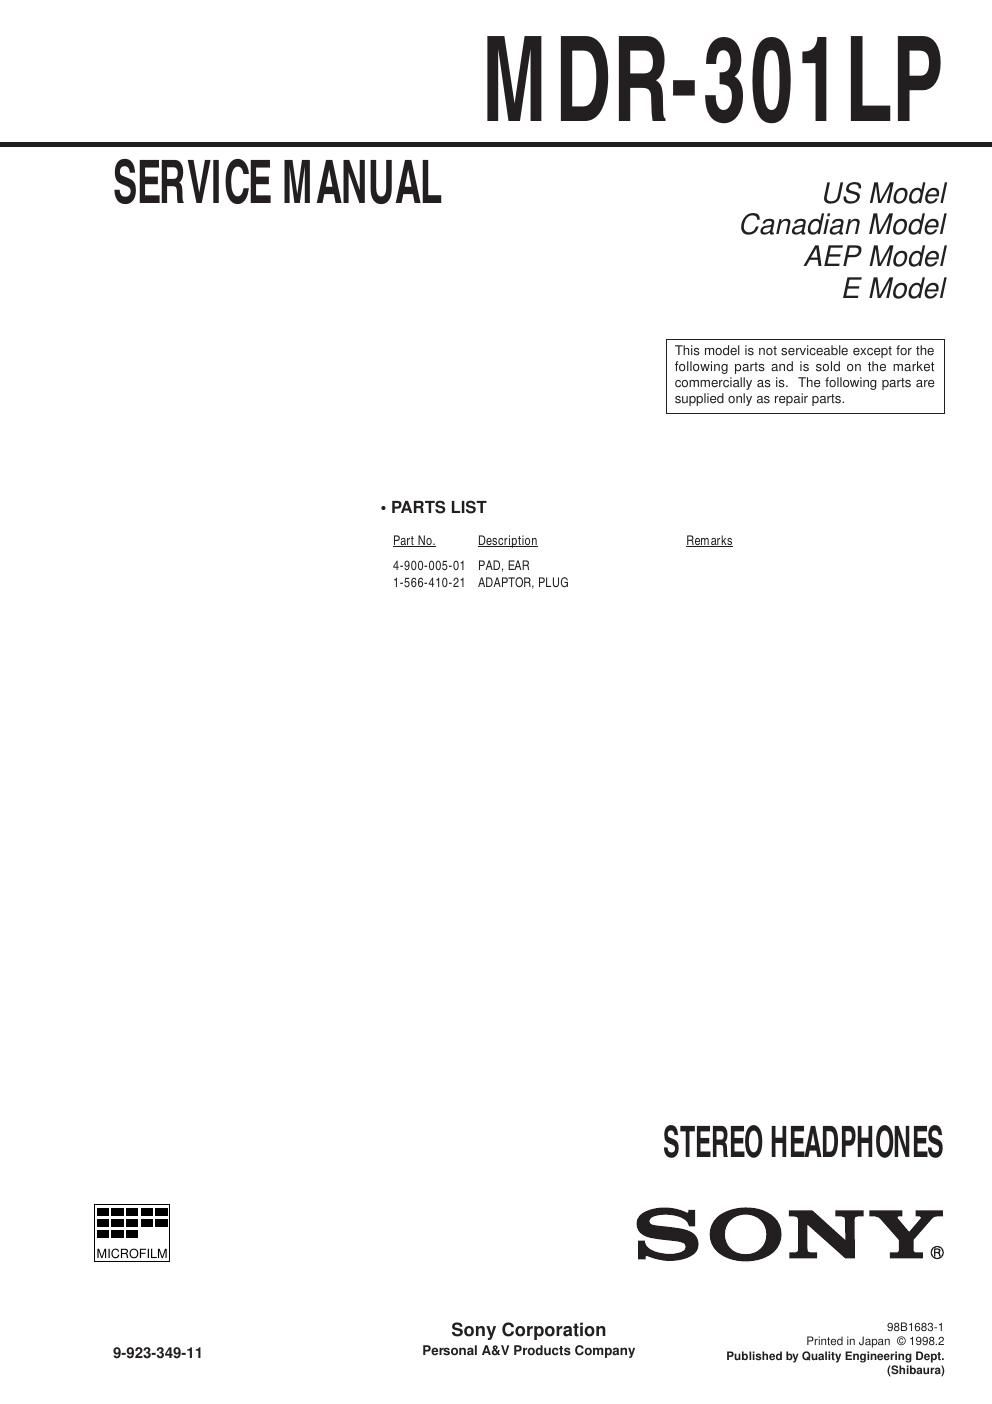 sony mdr 301 lp service manual